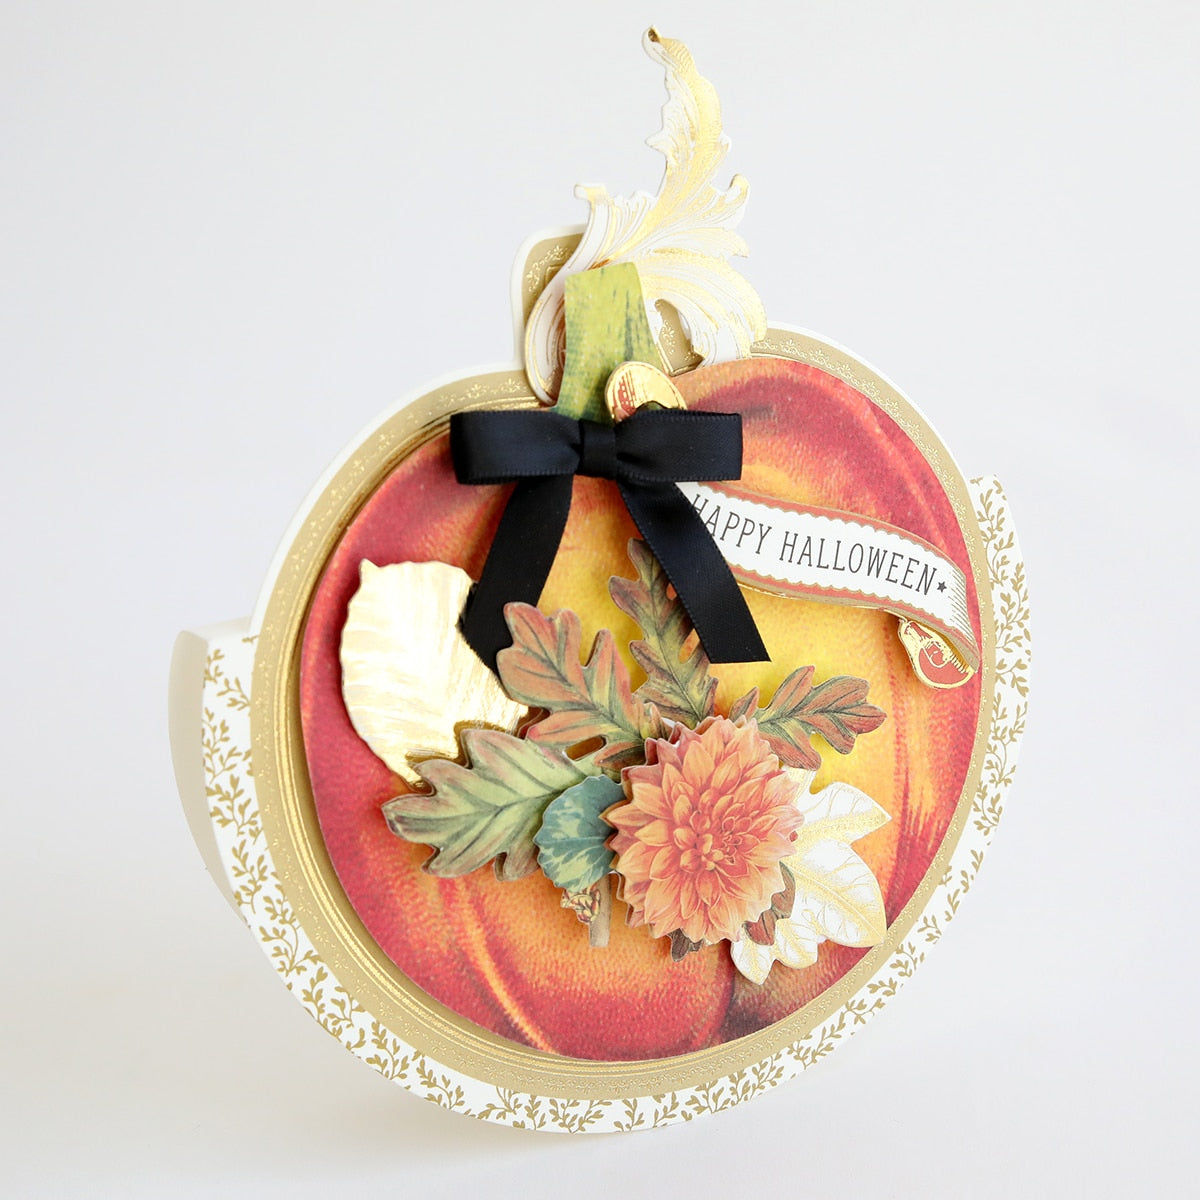 The Simply Rocking Pumpkin Card Making Kit with a pumpkin and flowers on it.